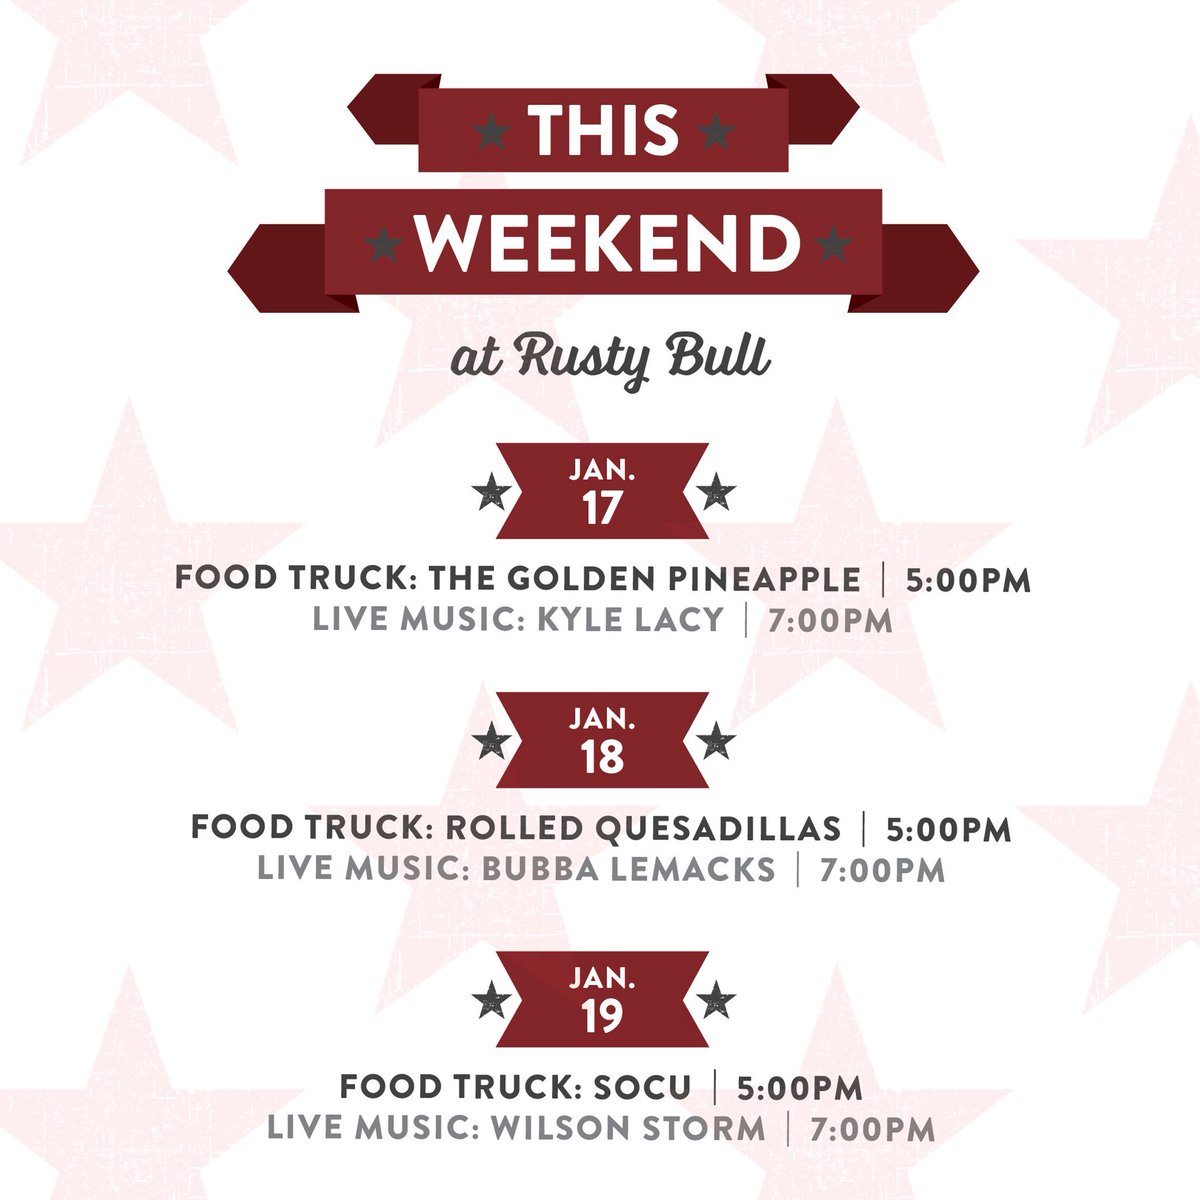 The weekend starts tonight at Rusty Bull. #ChsBeer #ChsFood #ChsDrinks